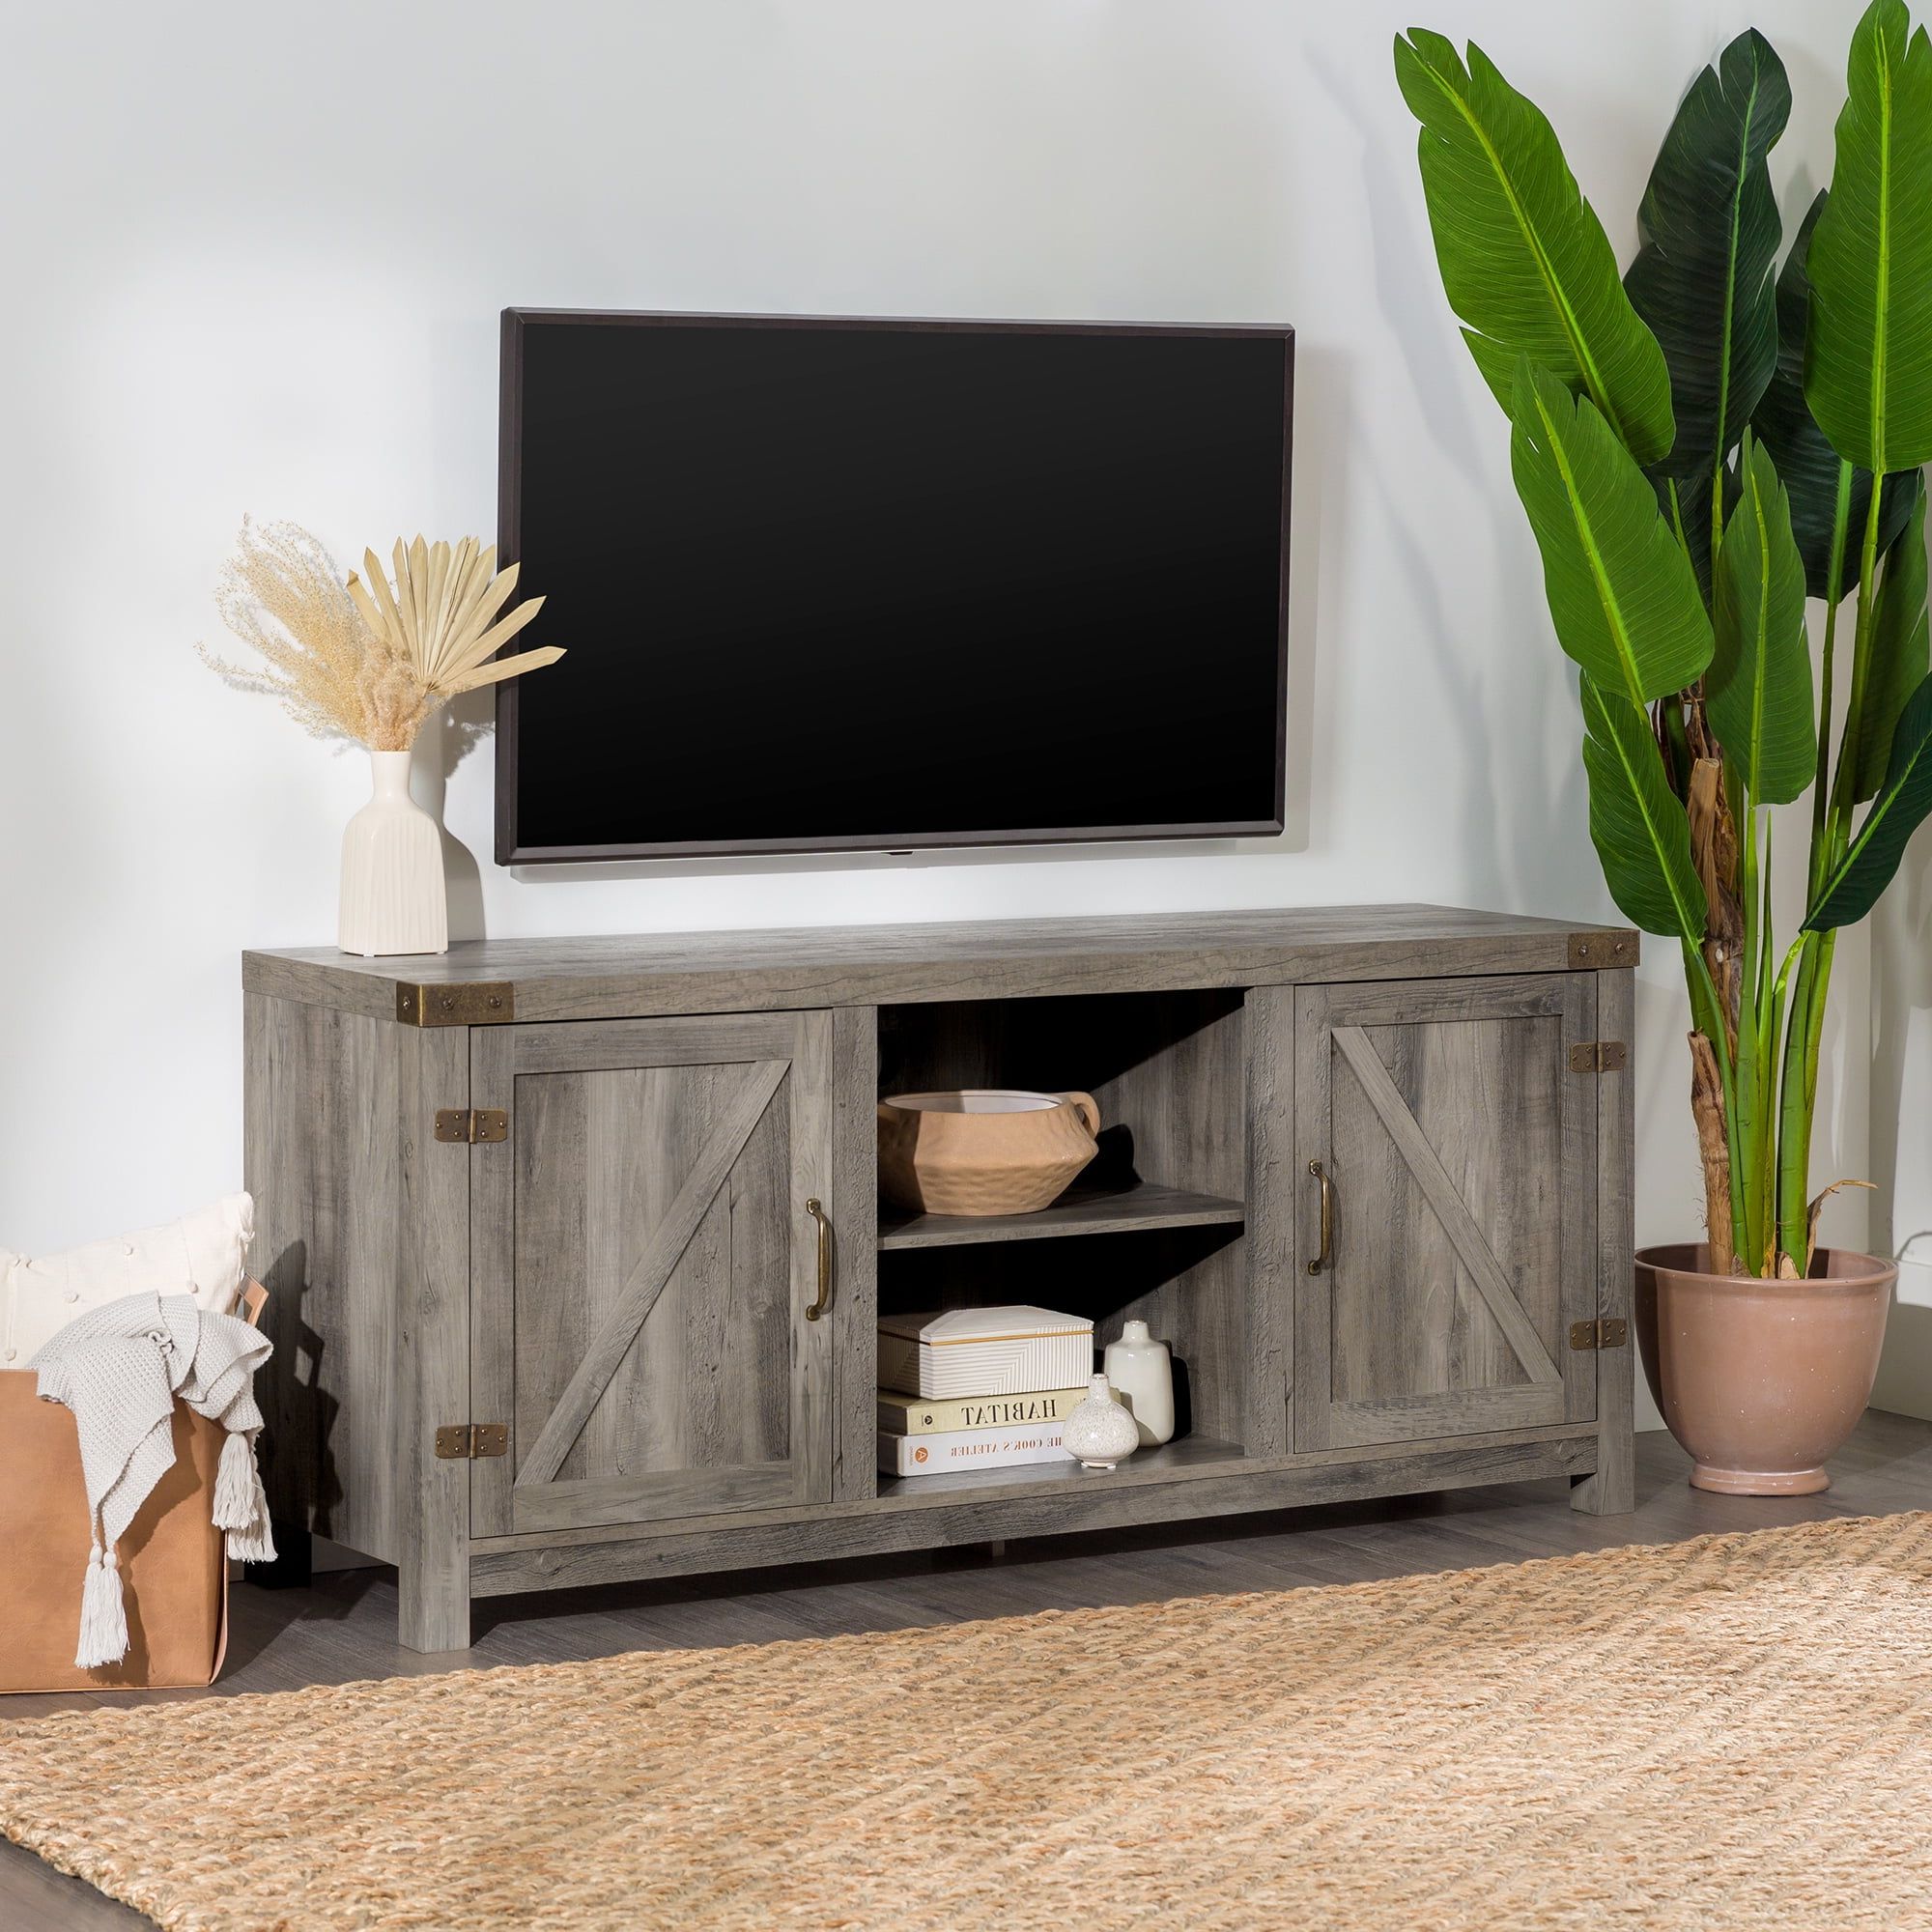 Woven Paths Modern Farmhouse Barn Door Tv Stand For Tvs Up To 65", Grey  Wash – Walmart With Regard To Farmhouse Stands For Tvs (View 4 of 20)